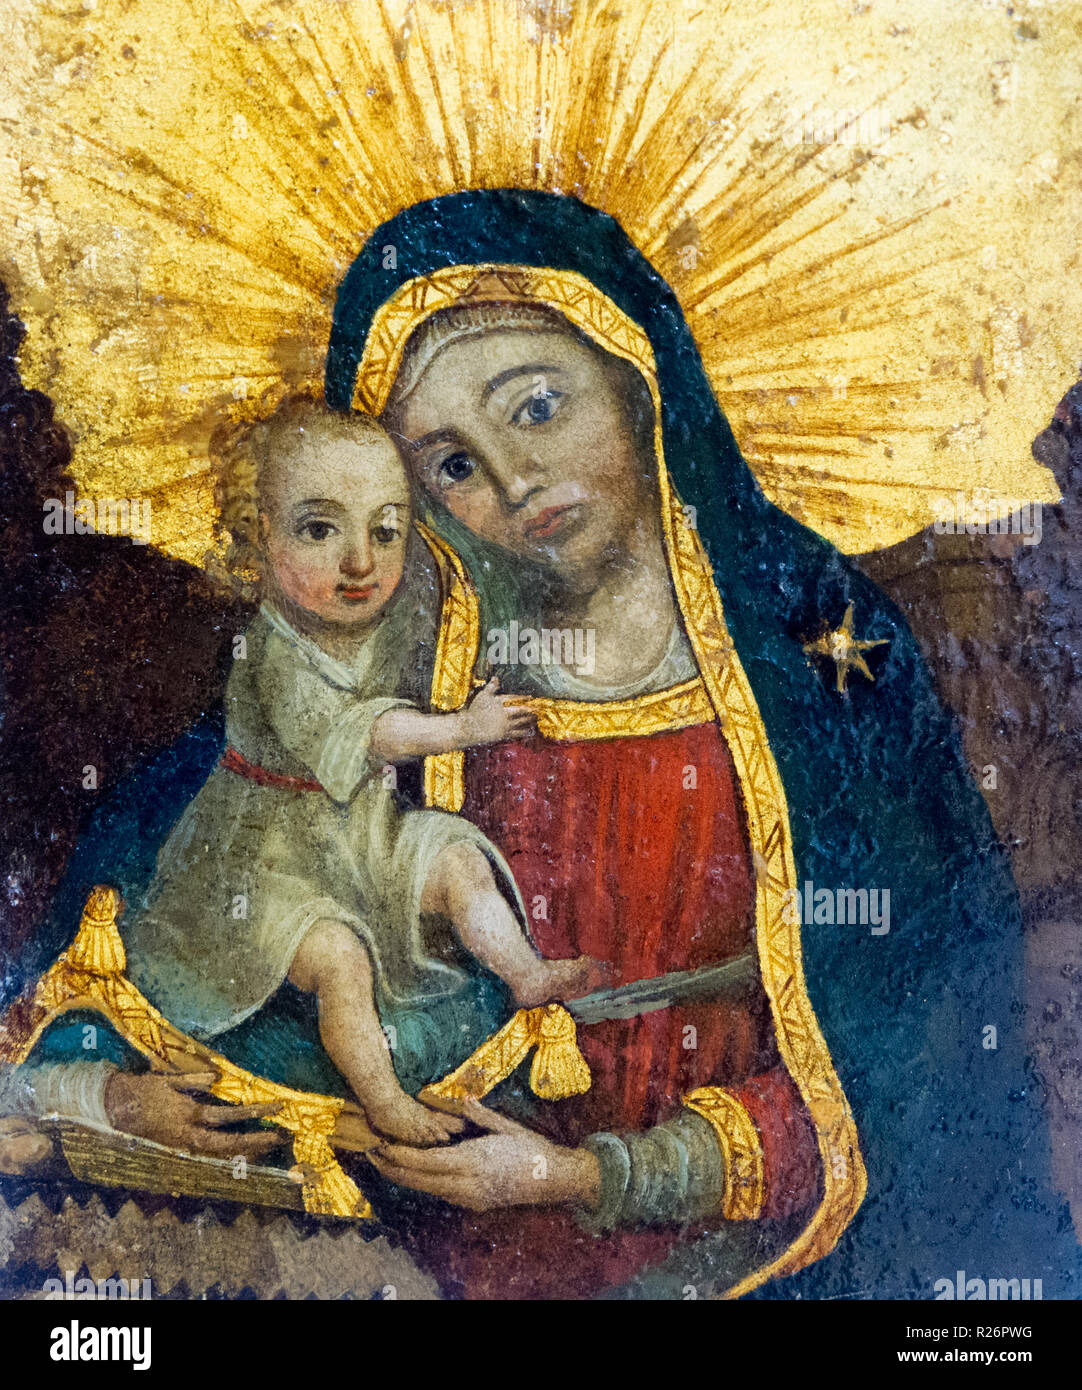 Bardejov, Slovakia. 2018/8/9. An icon of the Virgin Mary with Baby Jesus. From a Byzantine church. Currently in a museum in Bradejov. Stock Photo